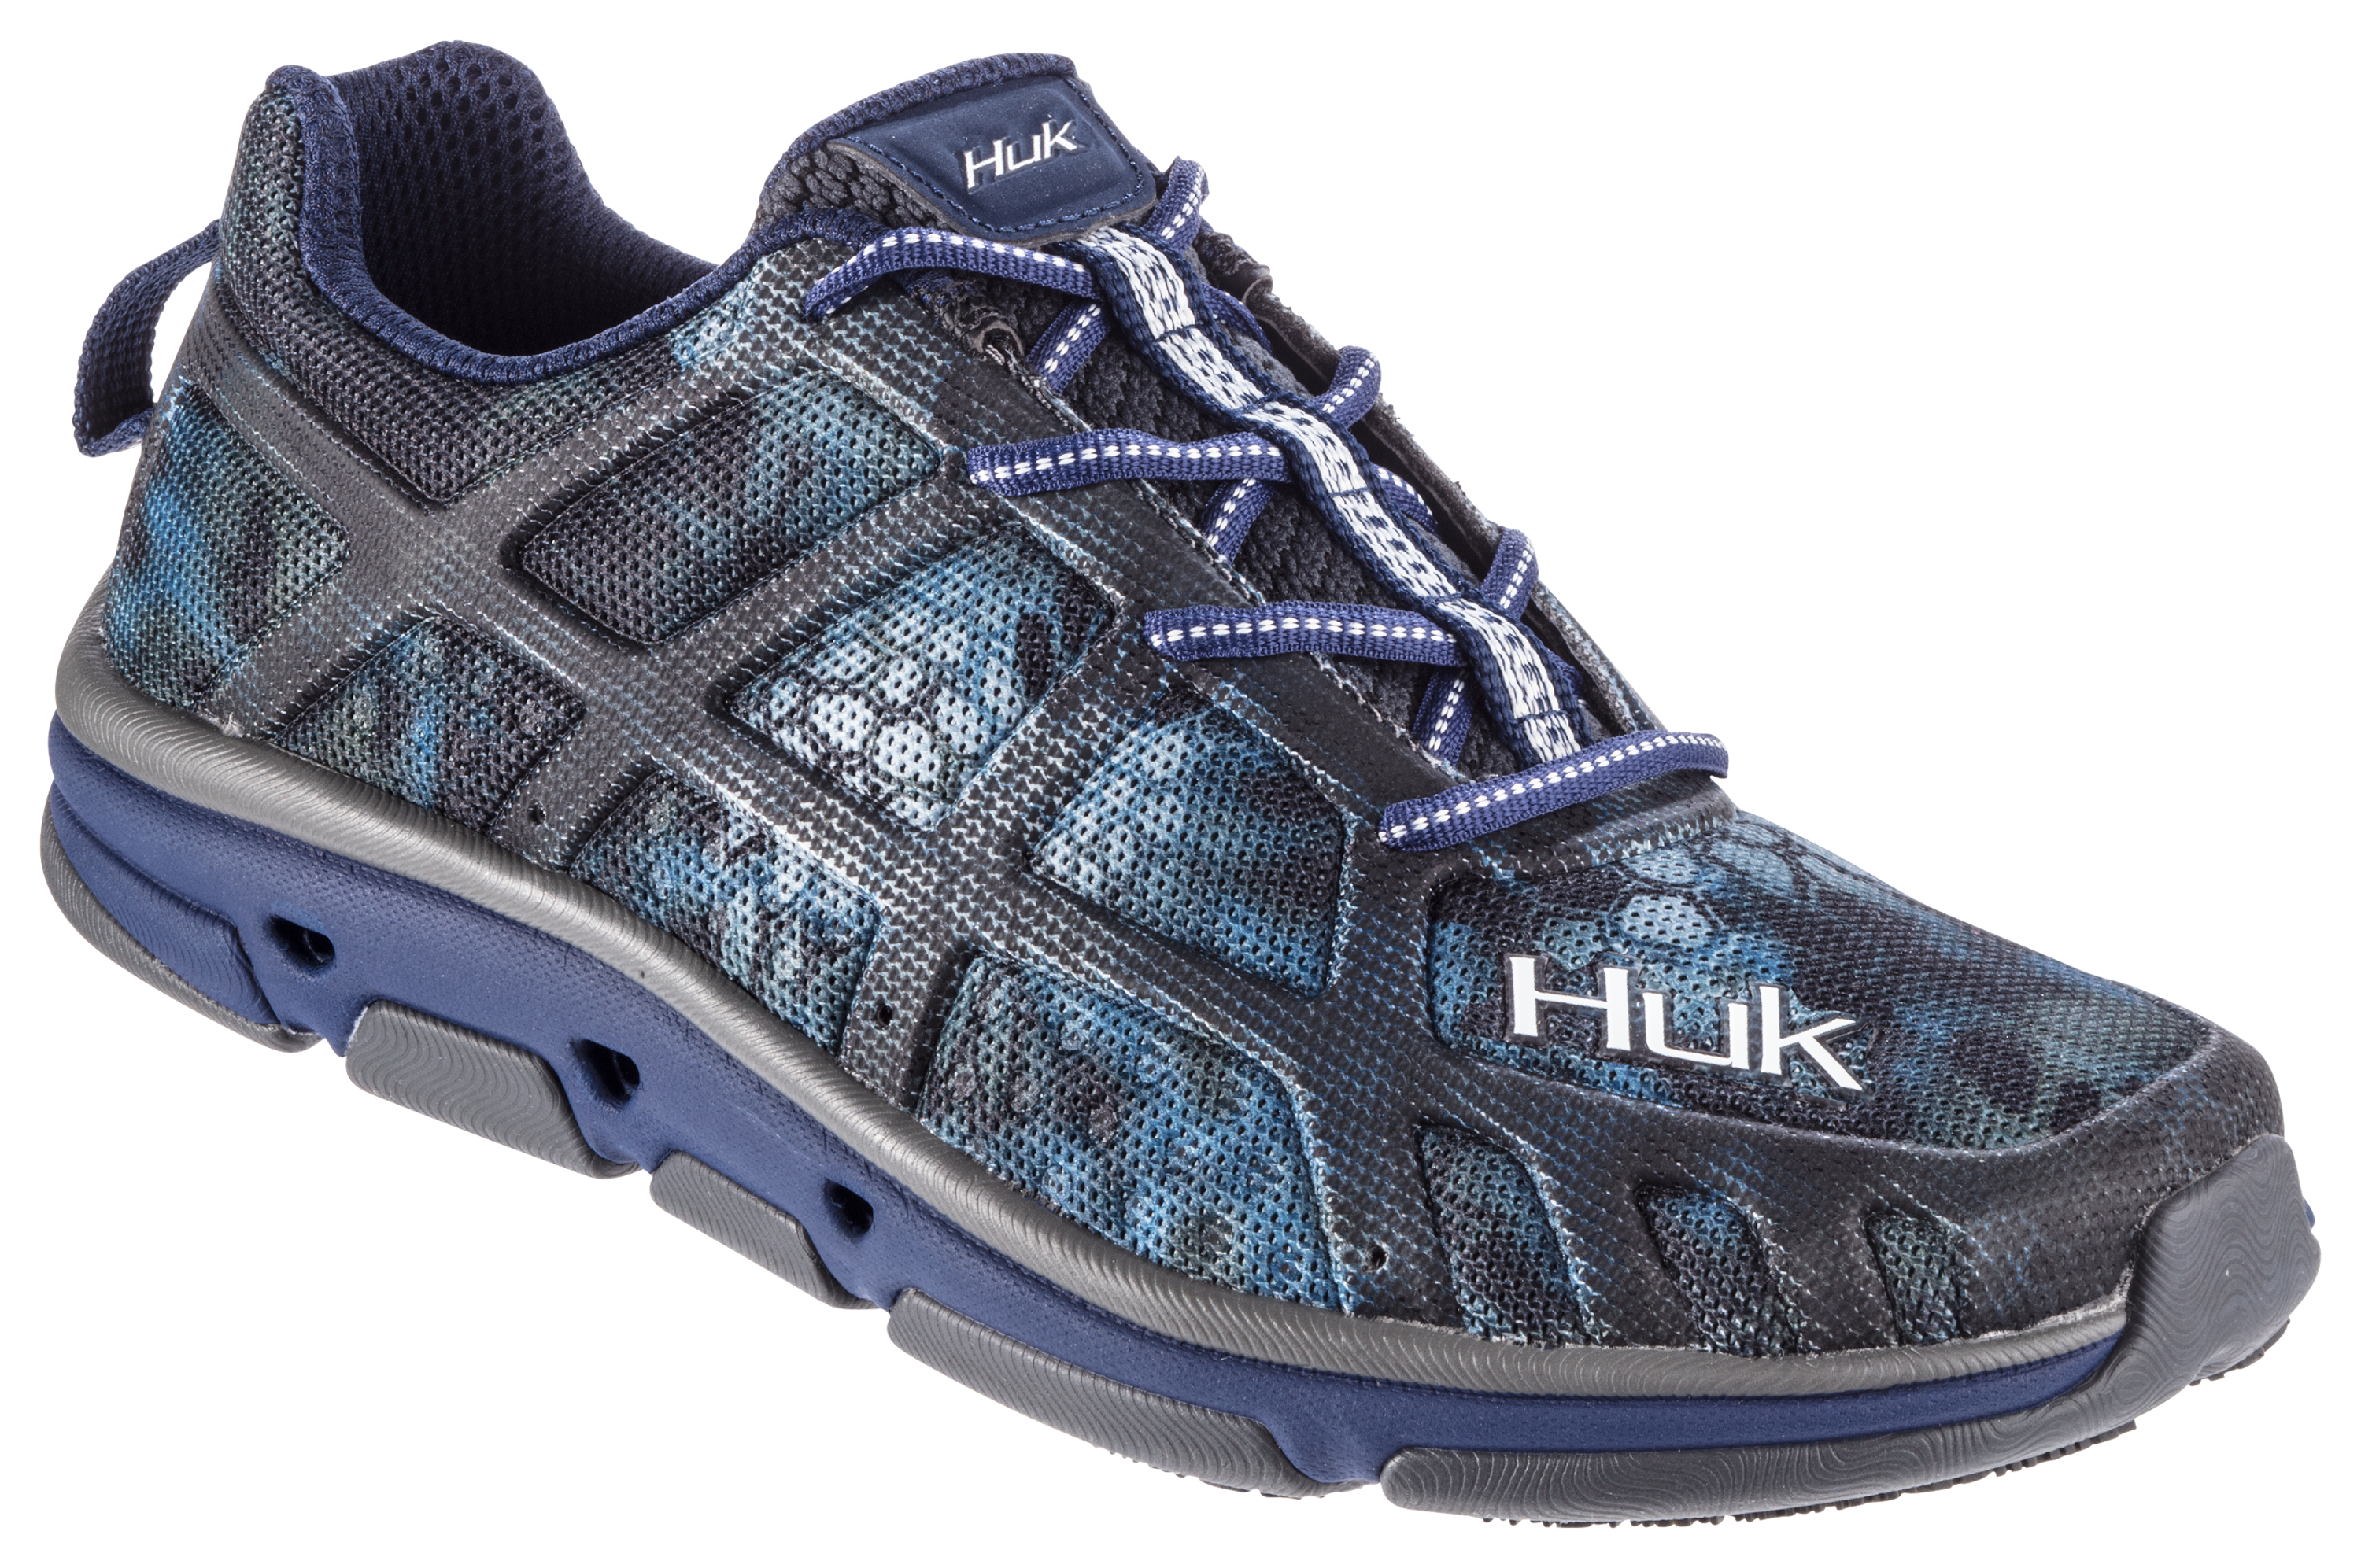 Huk Attack Fishing Shoes for Men